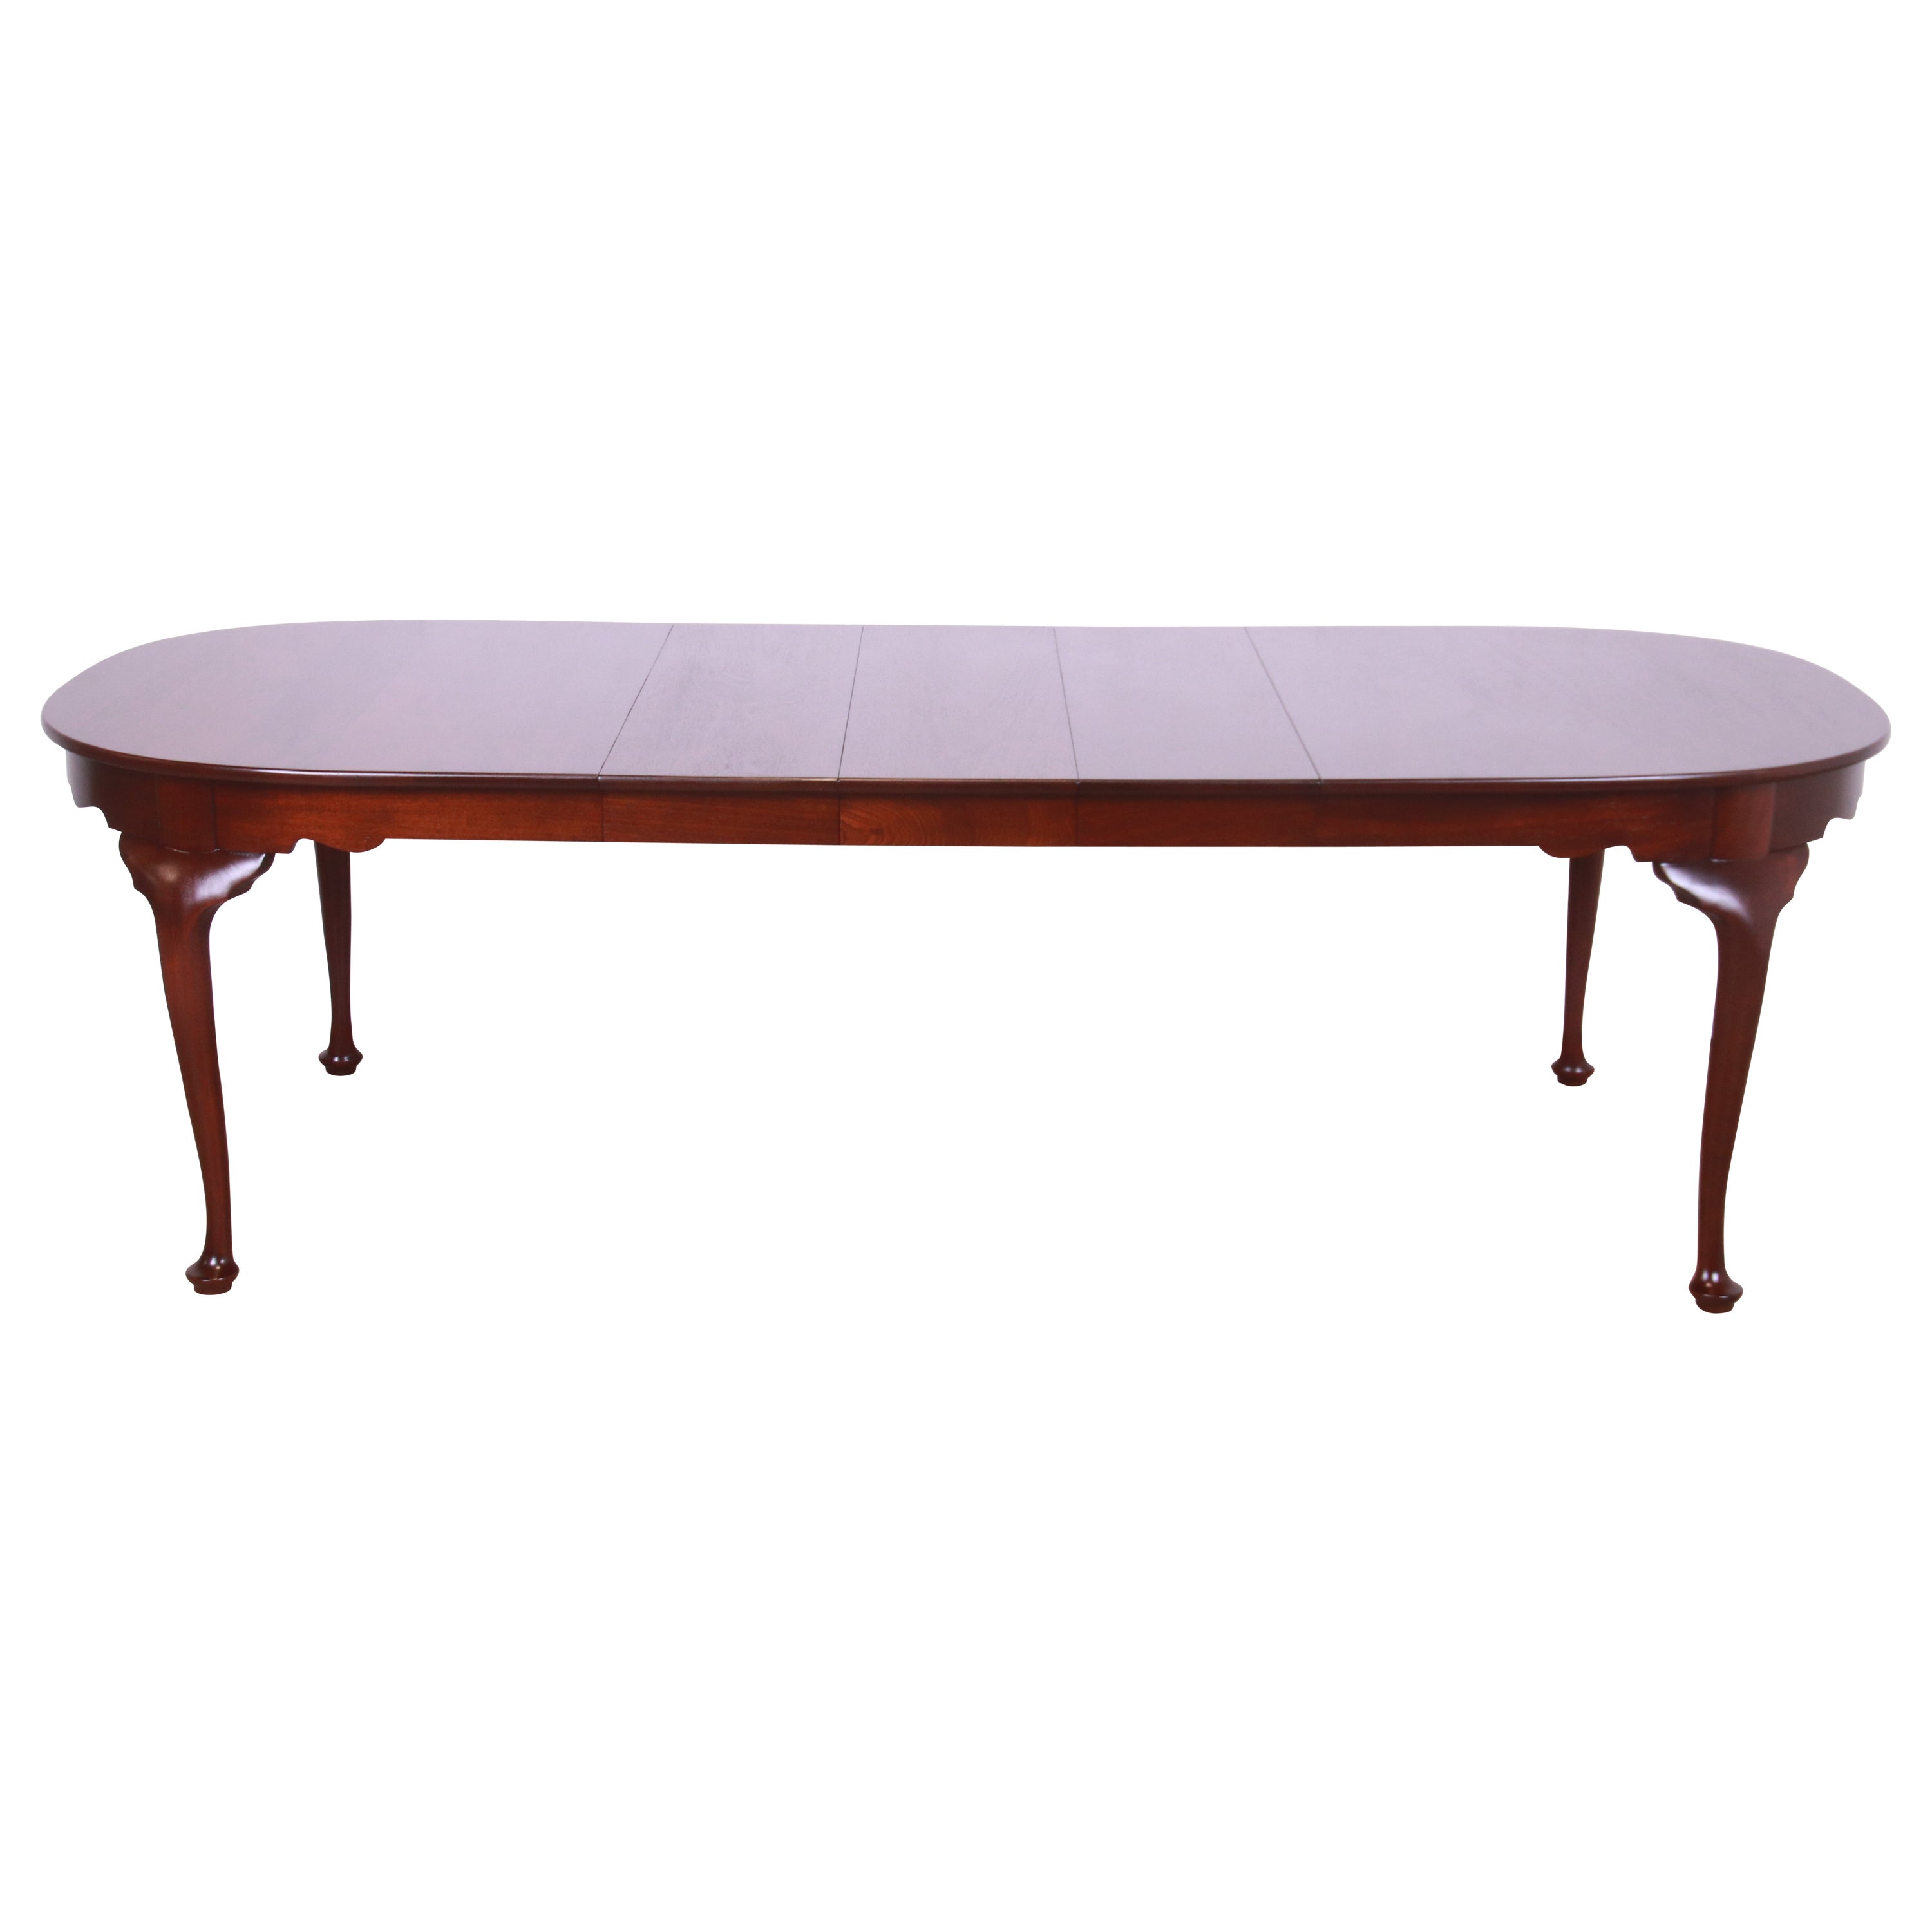 Henkel Harris Queen Anne Solid Mahogany Extension Dining Table, Newly Refinished